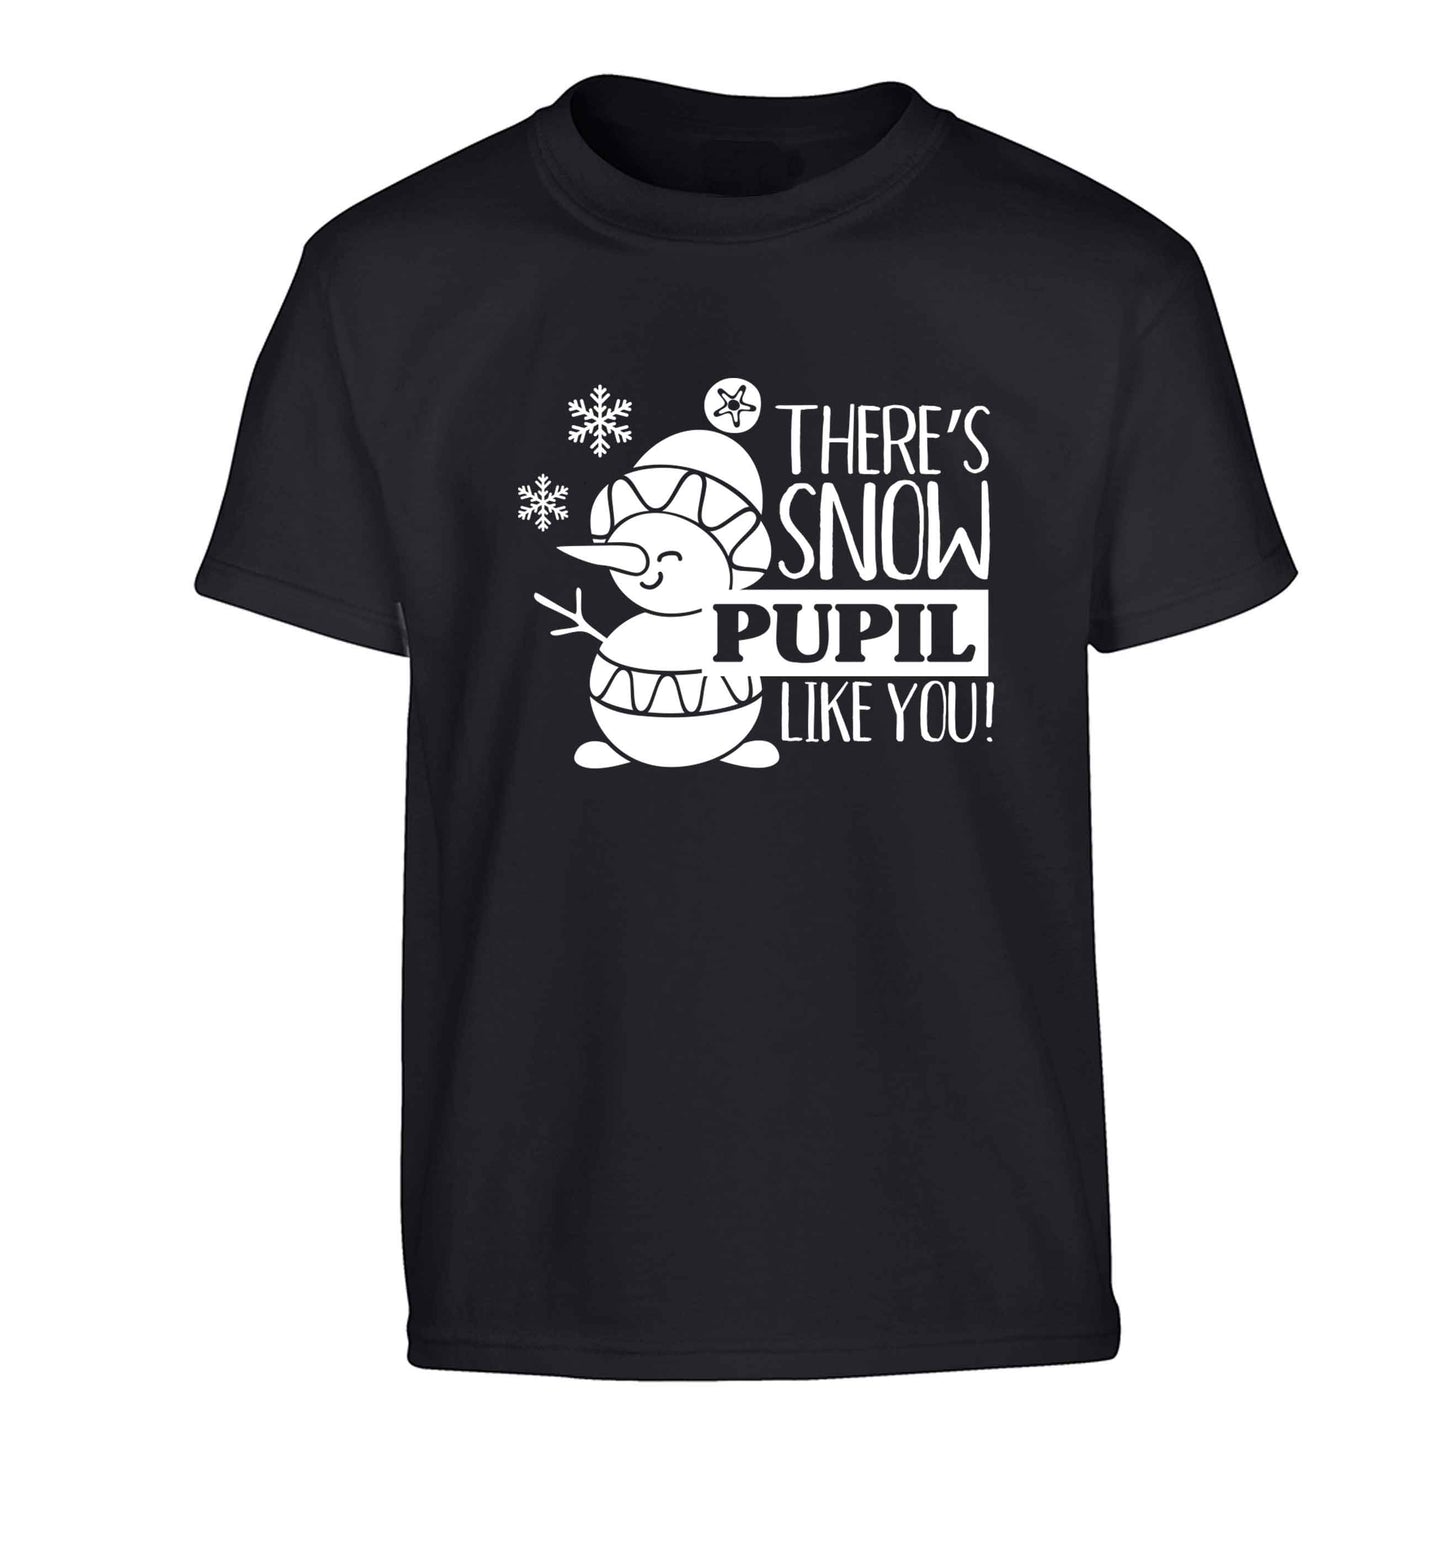 There's snow pupil like you Children's black Tshirt 12-13 Years